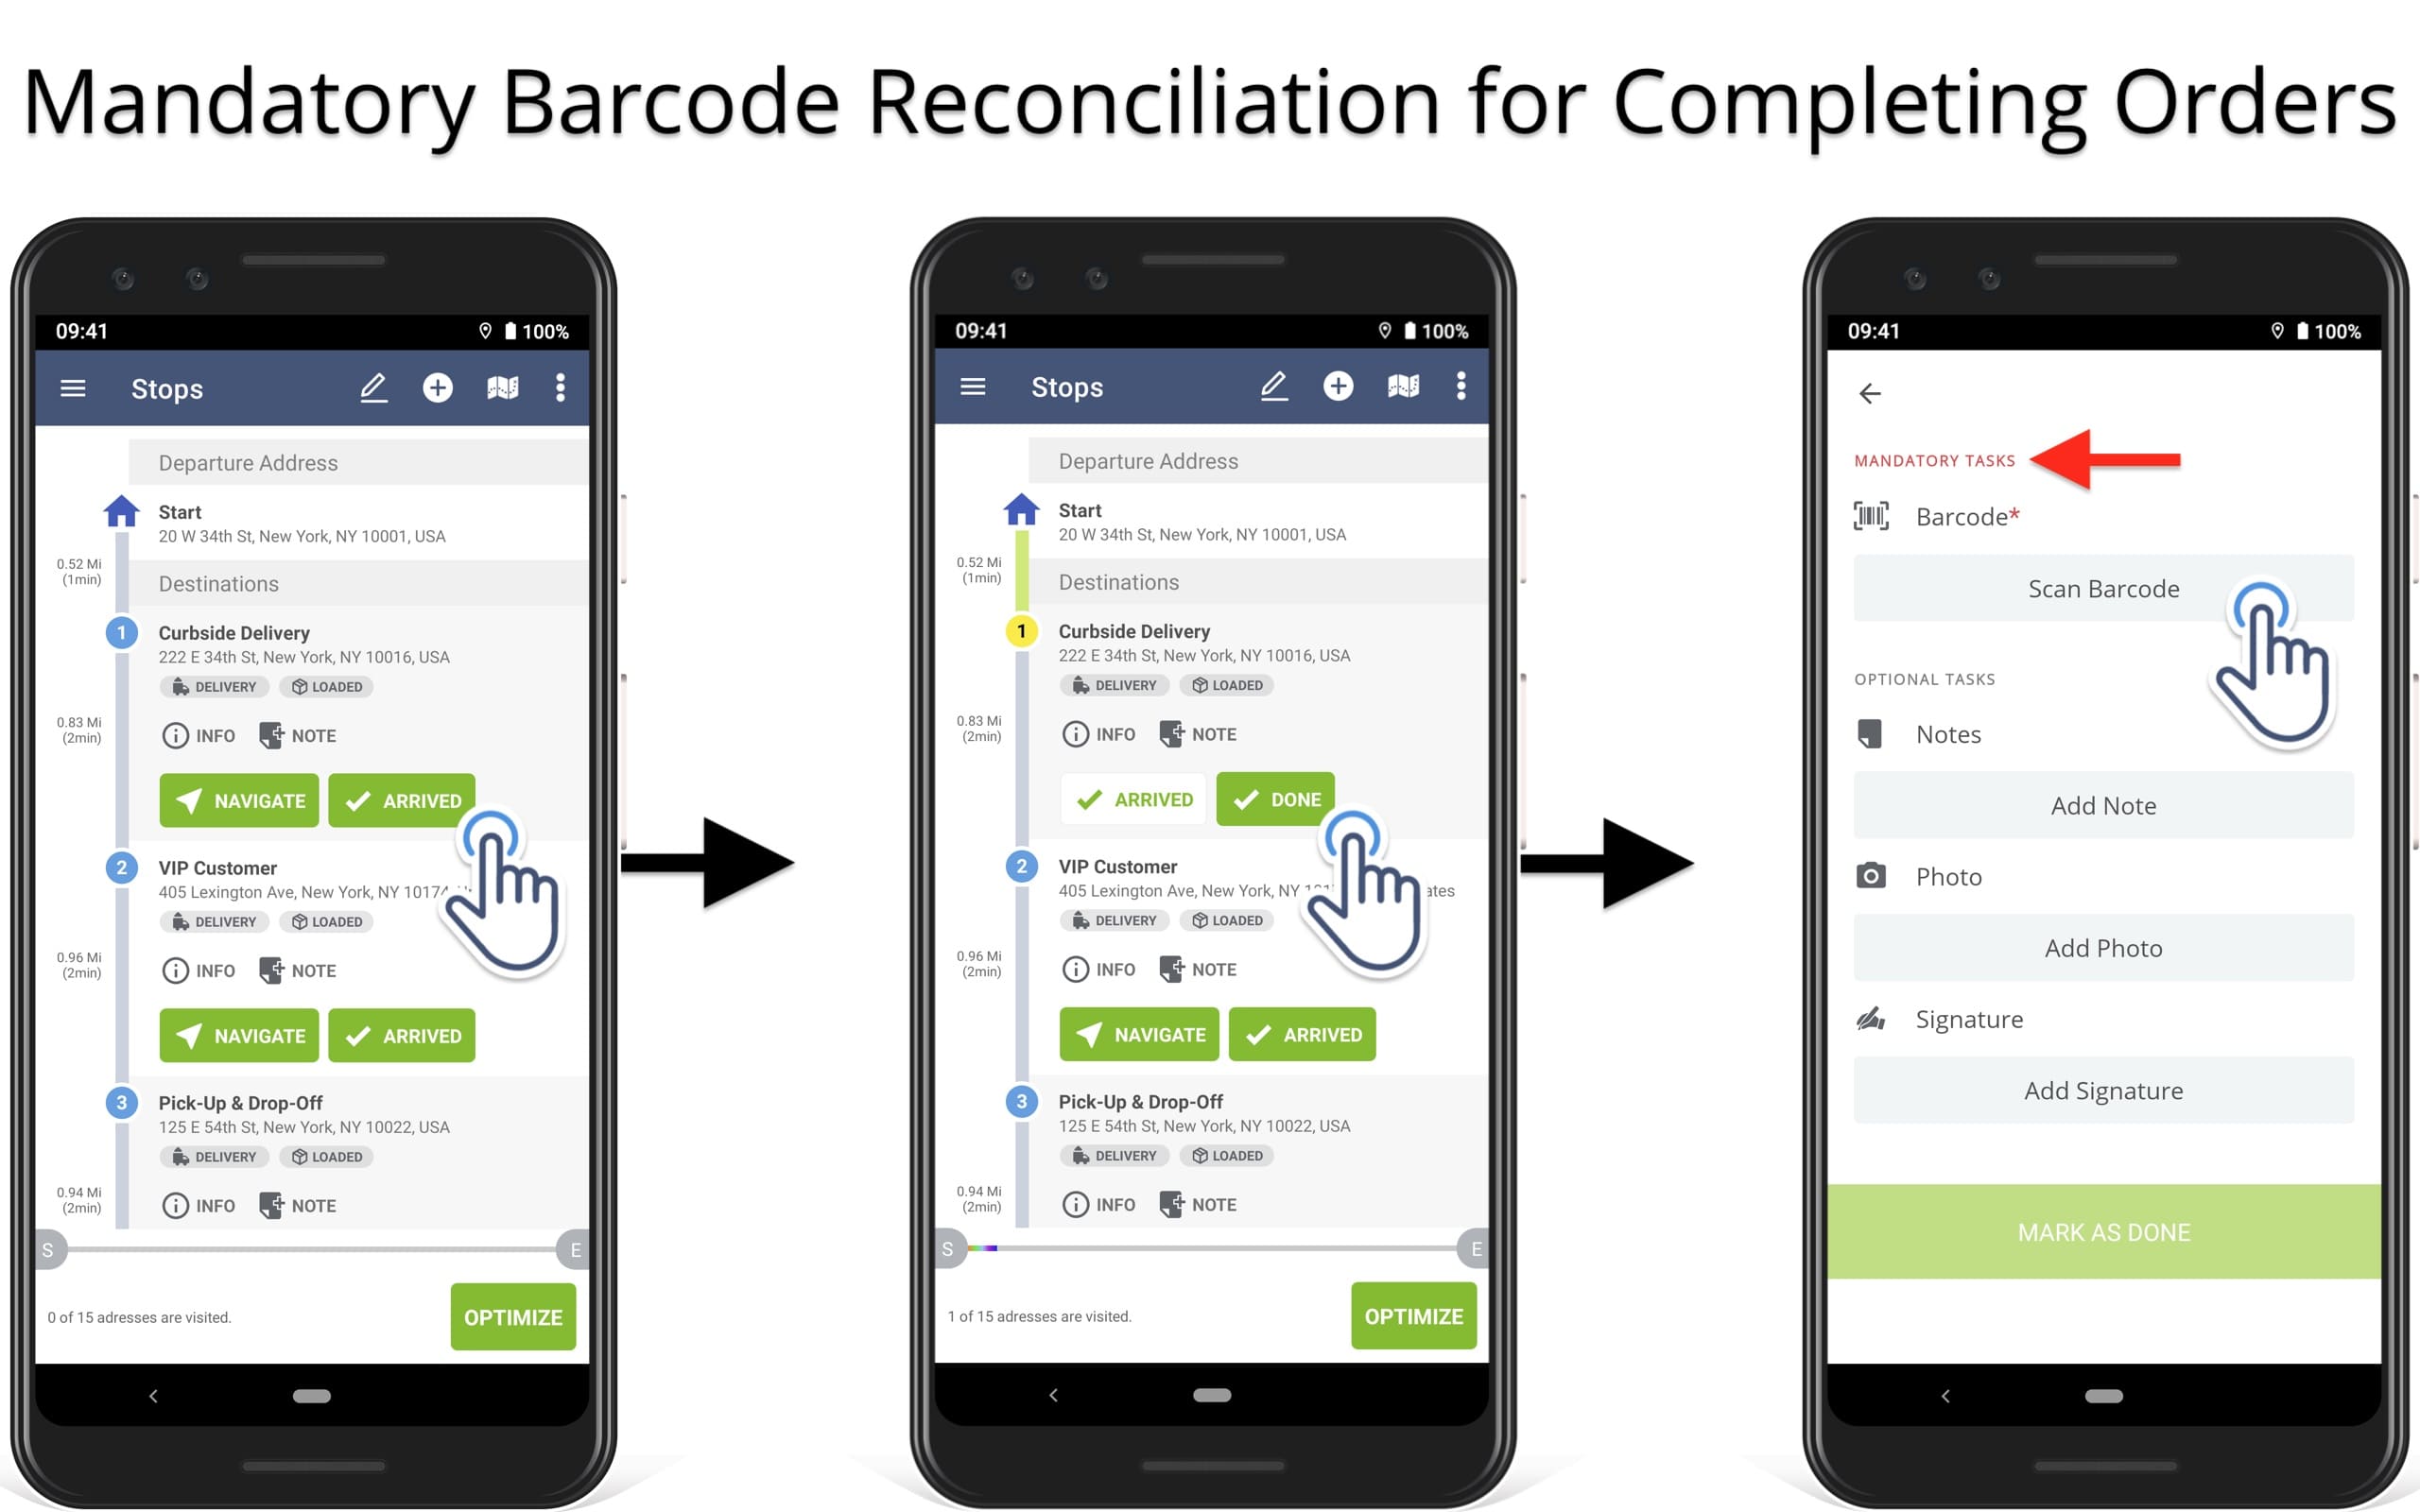 Mandatory barcode reconciliation for marking a route destination, delivery, or order as completed.